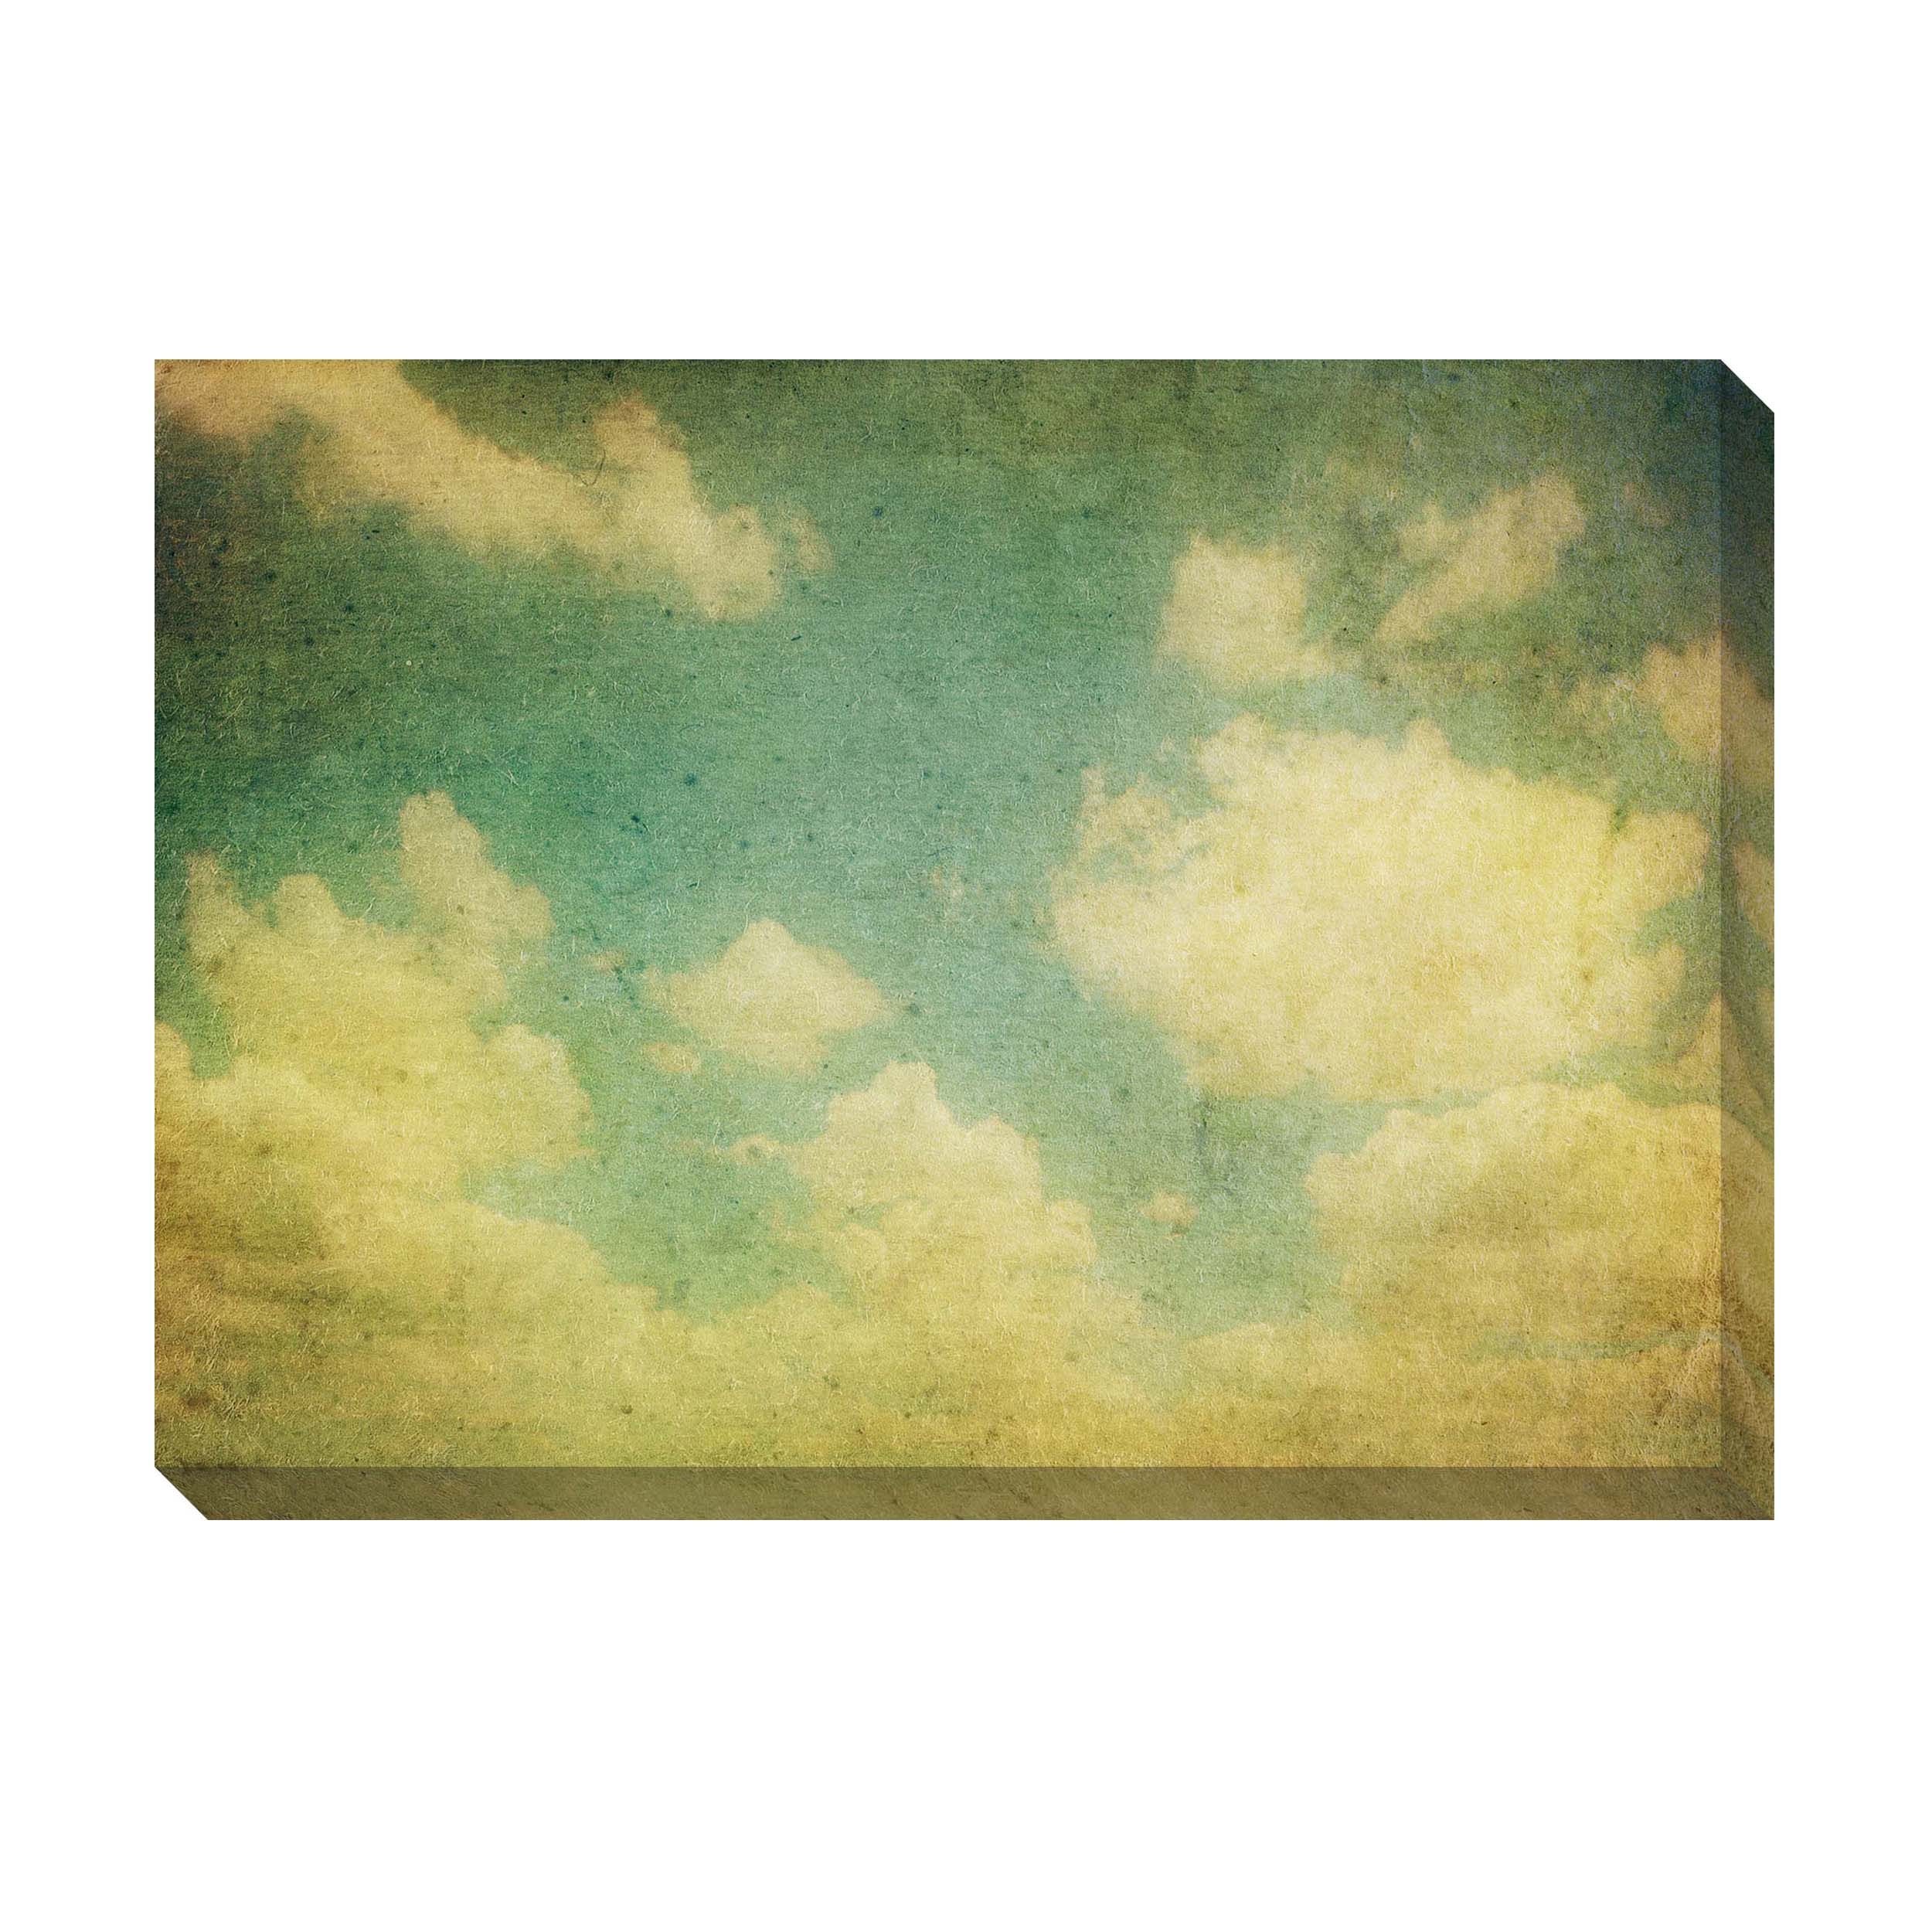 Vintage Clouds III Oversized Gallery Wrapped Canvas - Overstock ...